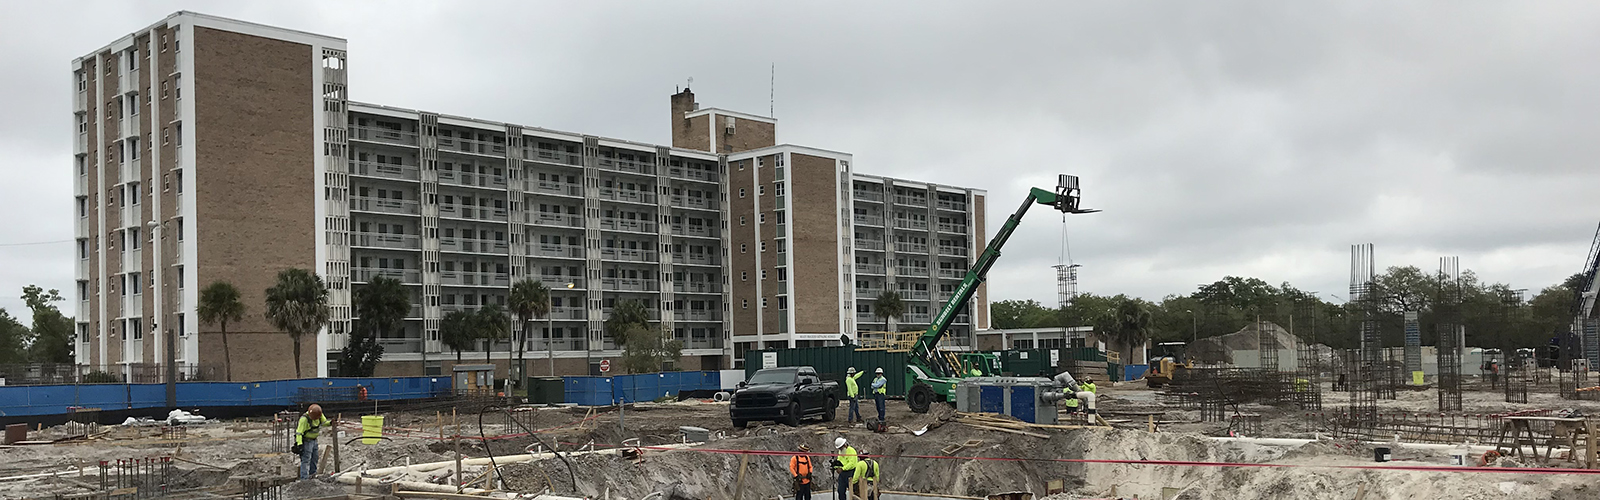 Work crews complete demolition of the North Boulevard Homes public housing and start construction on the West River redevelopment project.